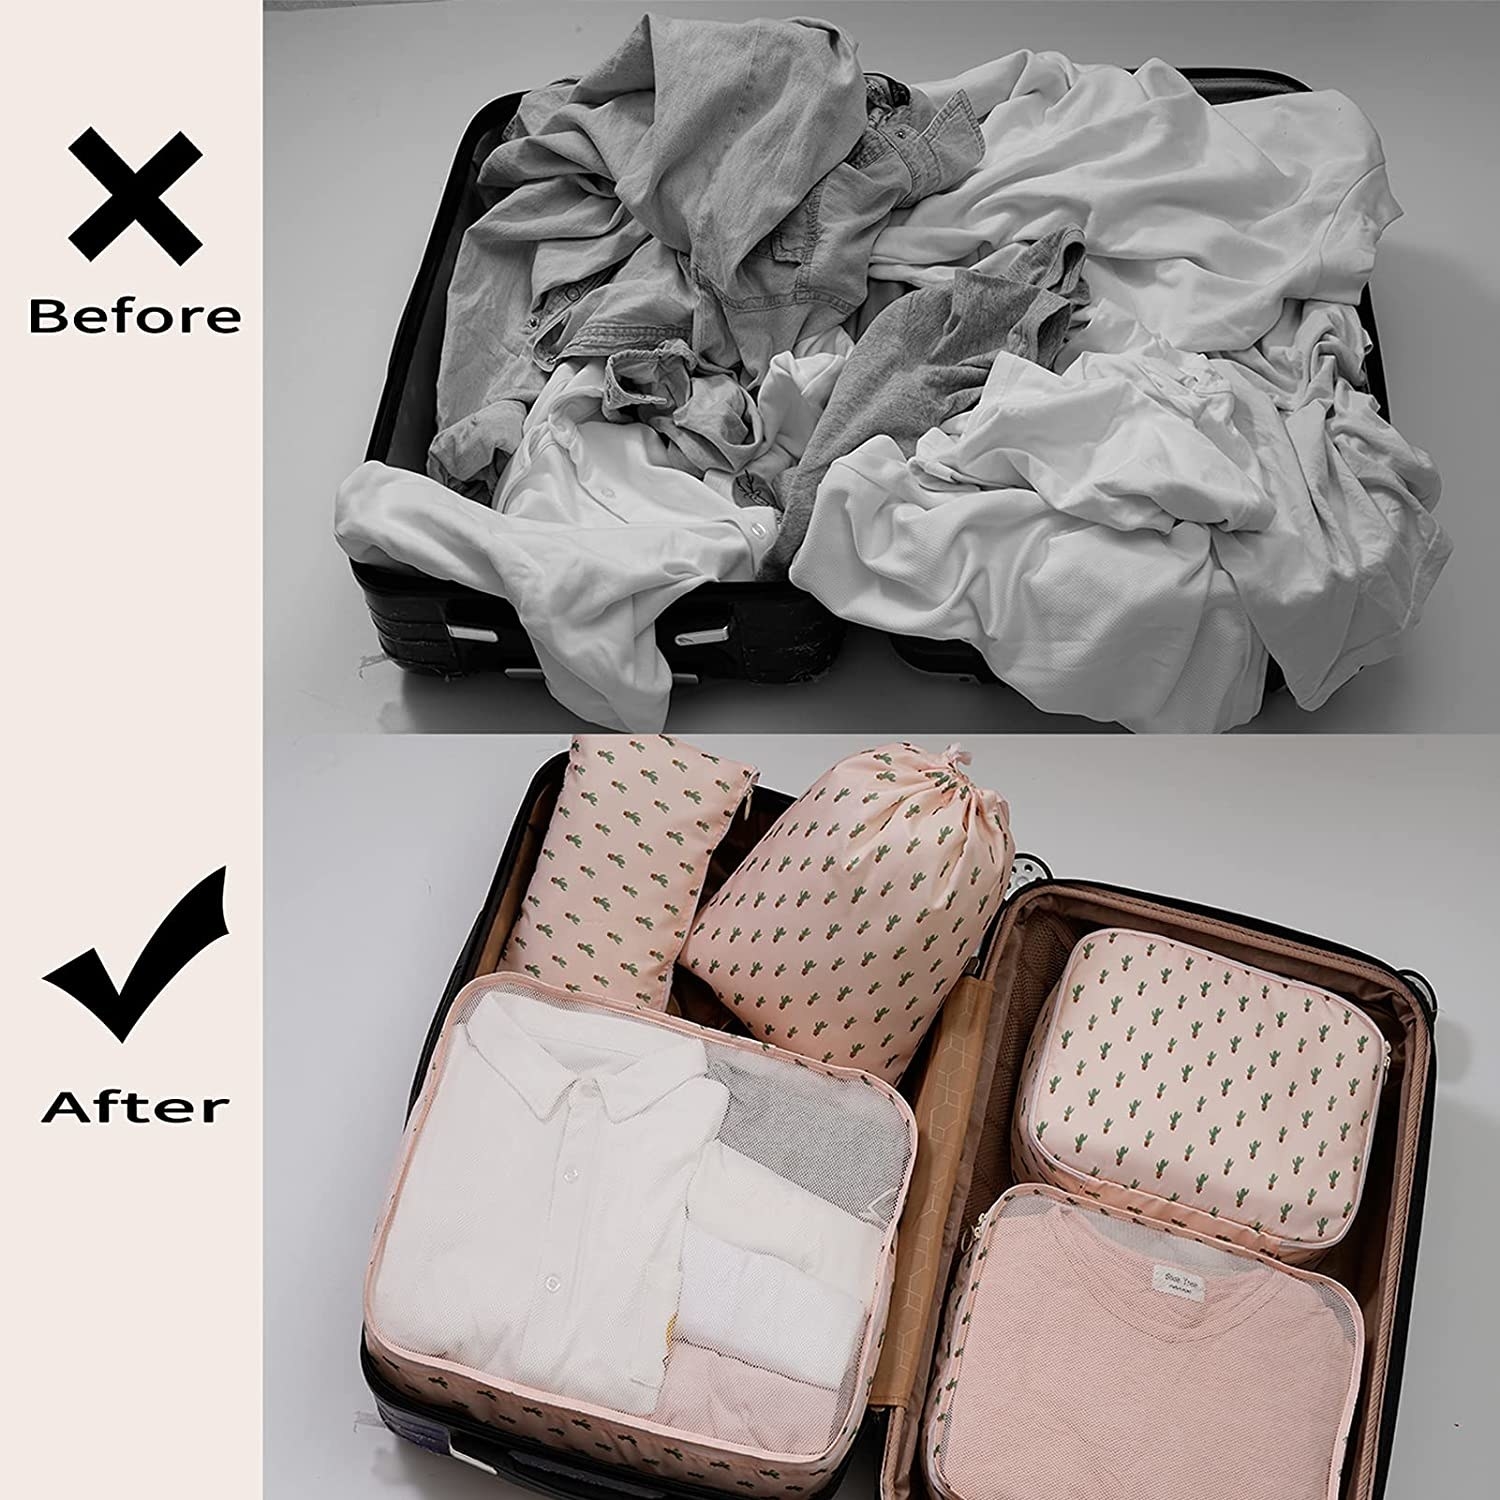 a before and after image of a luggage with and without the packing cubes